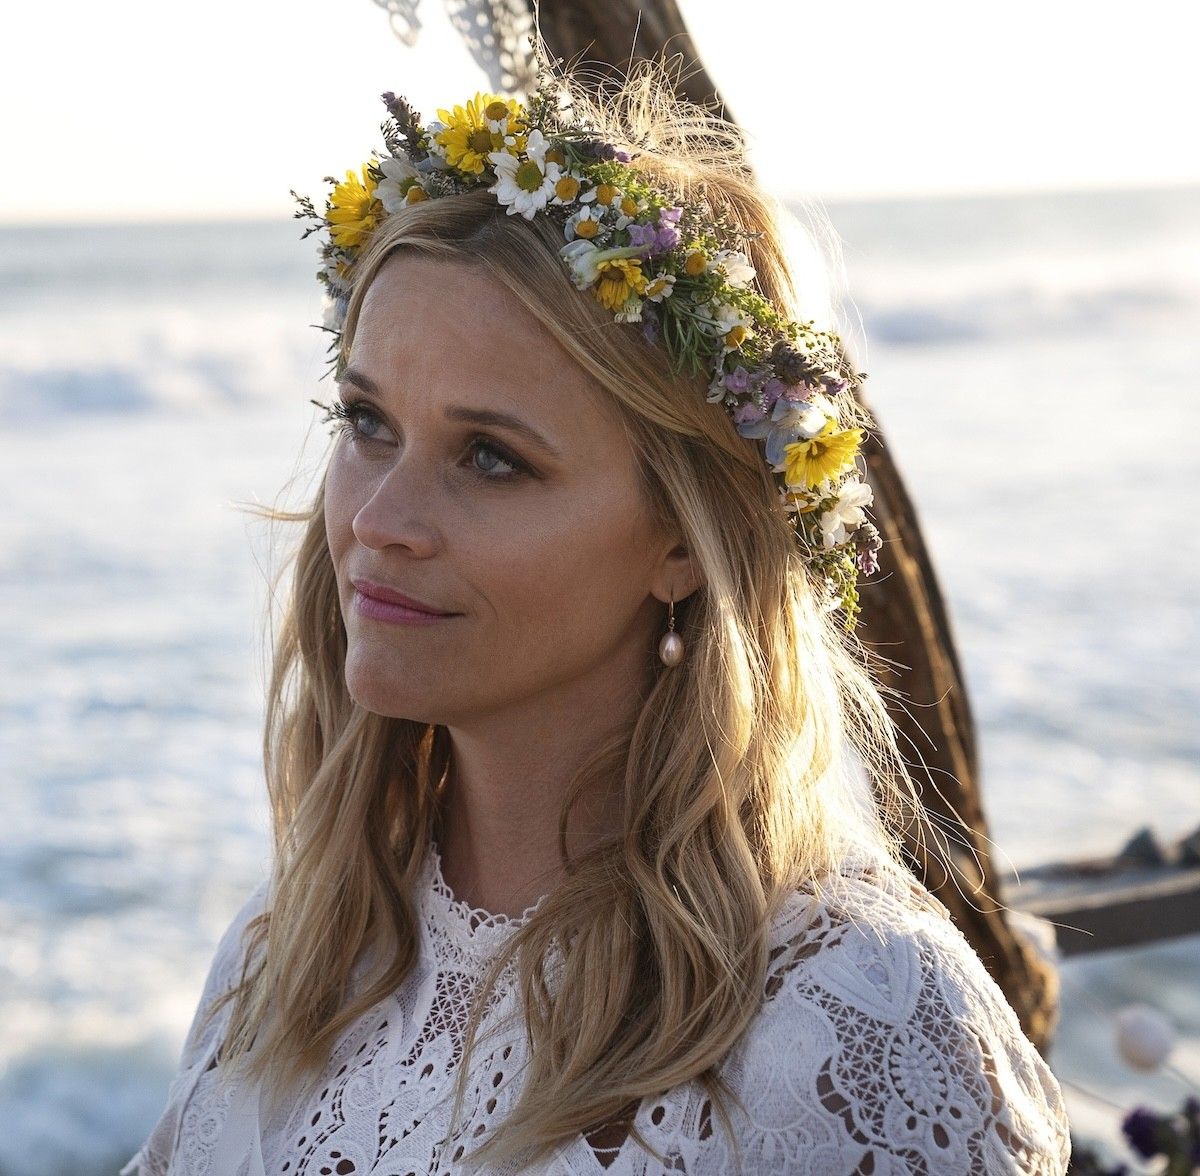 Reese Witherspoon's Hilarious 'Big Little Lies' Story Will Change How You Watch The Show